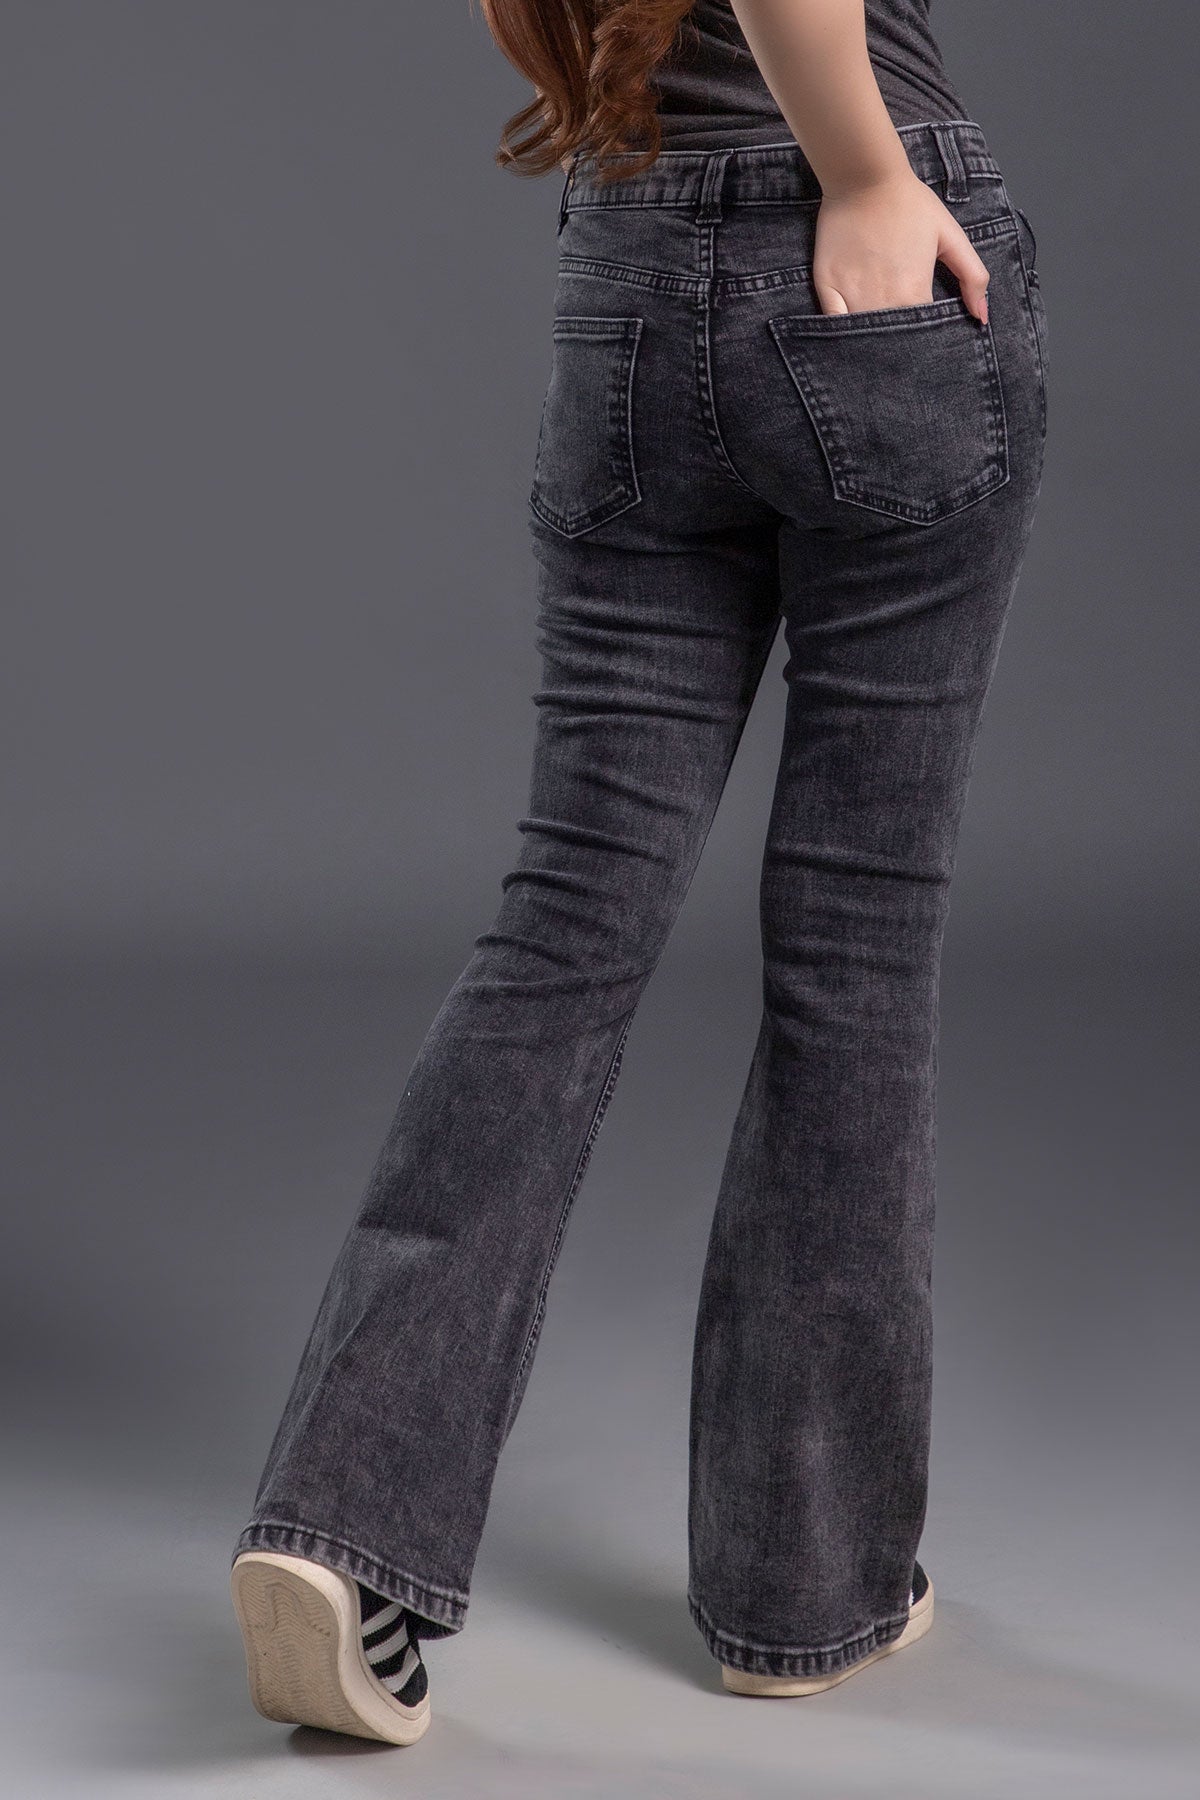 Low Waist Bootcut Jeans Grey Women Gina Tricot, 52% OFF